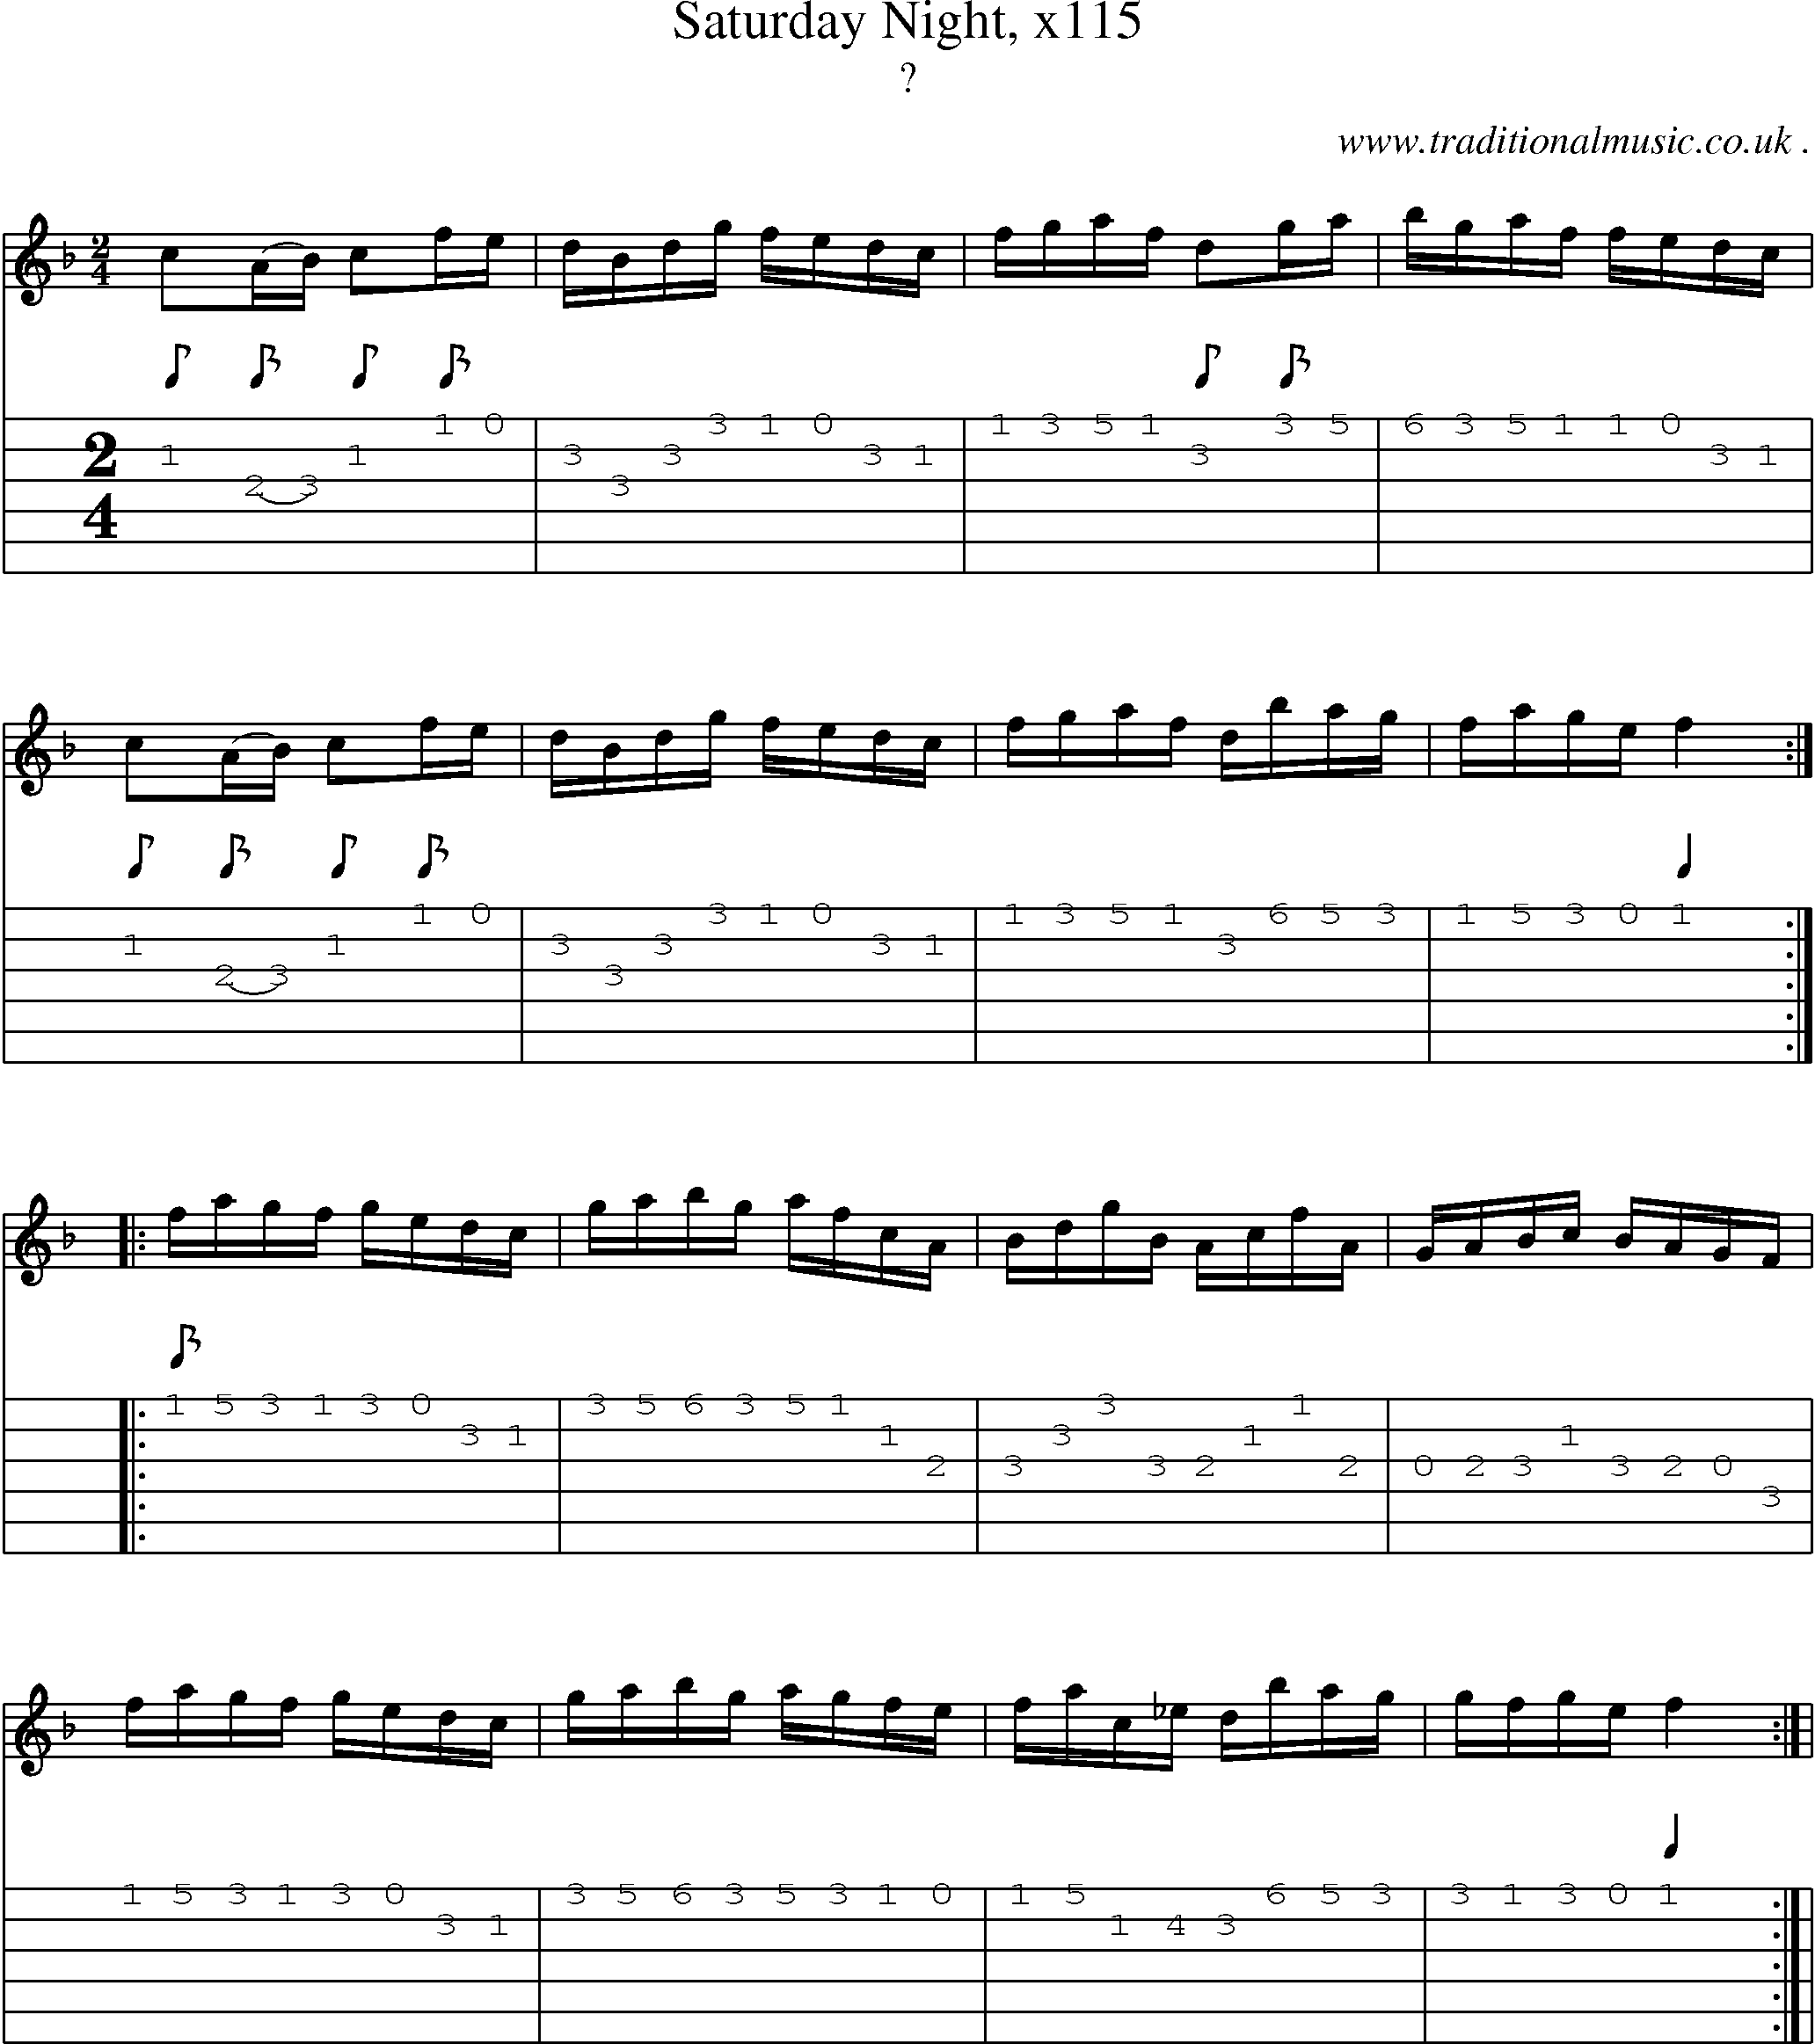 Sheet-Music and Guitar Tabs for Saturday Night X115